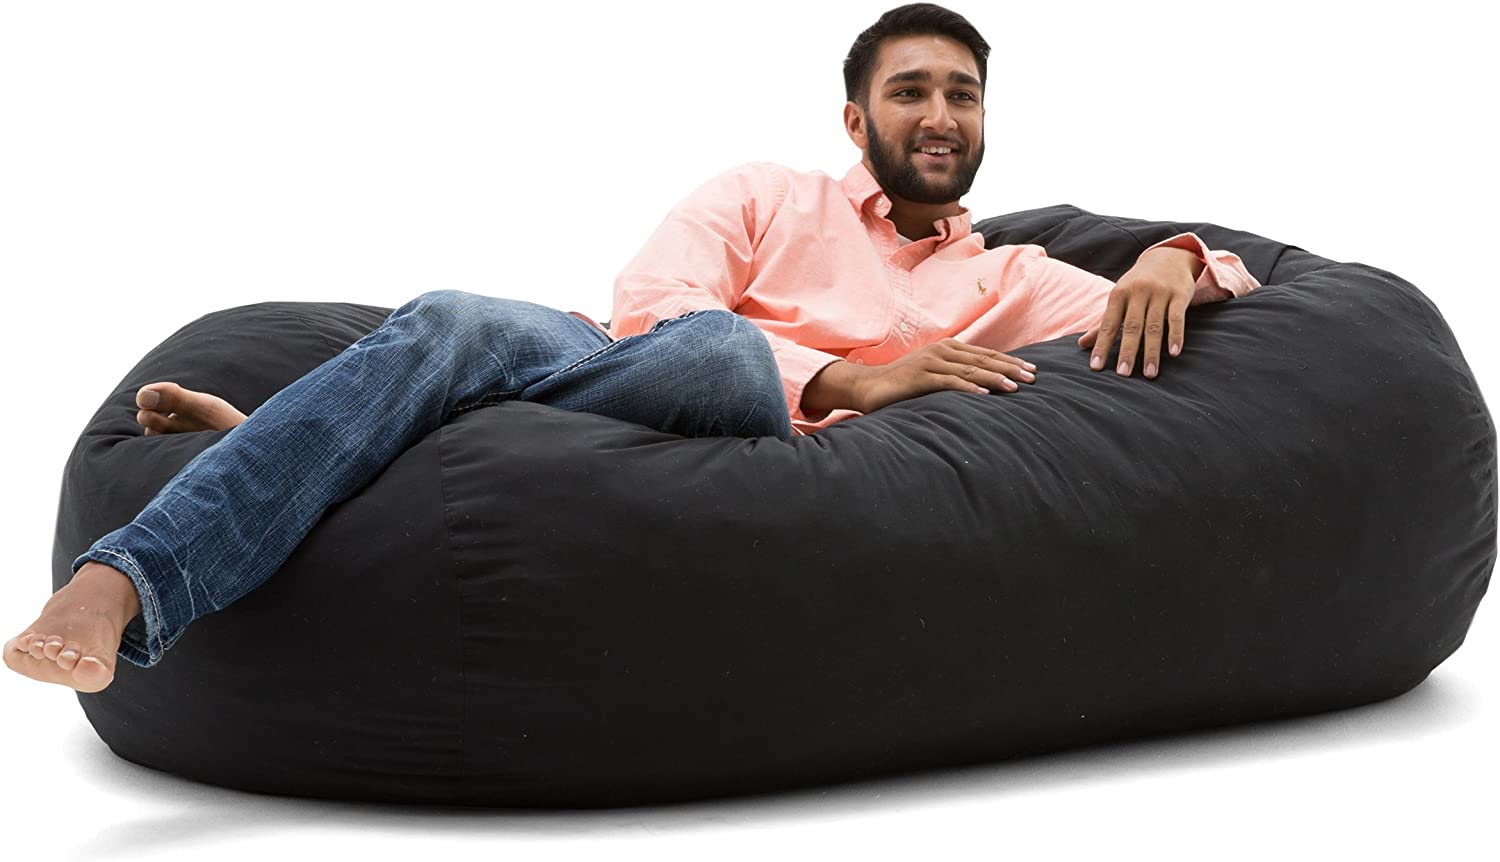 Sale > best large bean bag chair > in stock